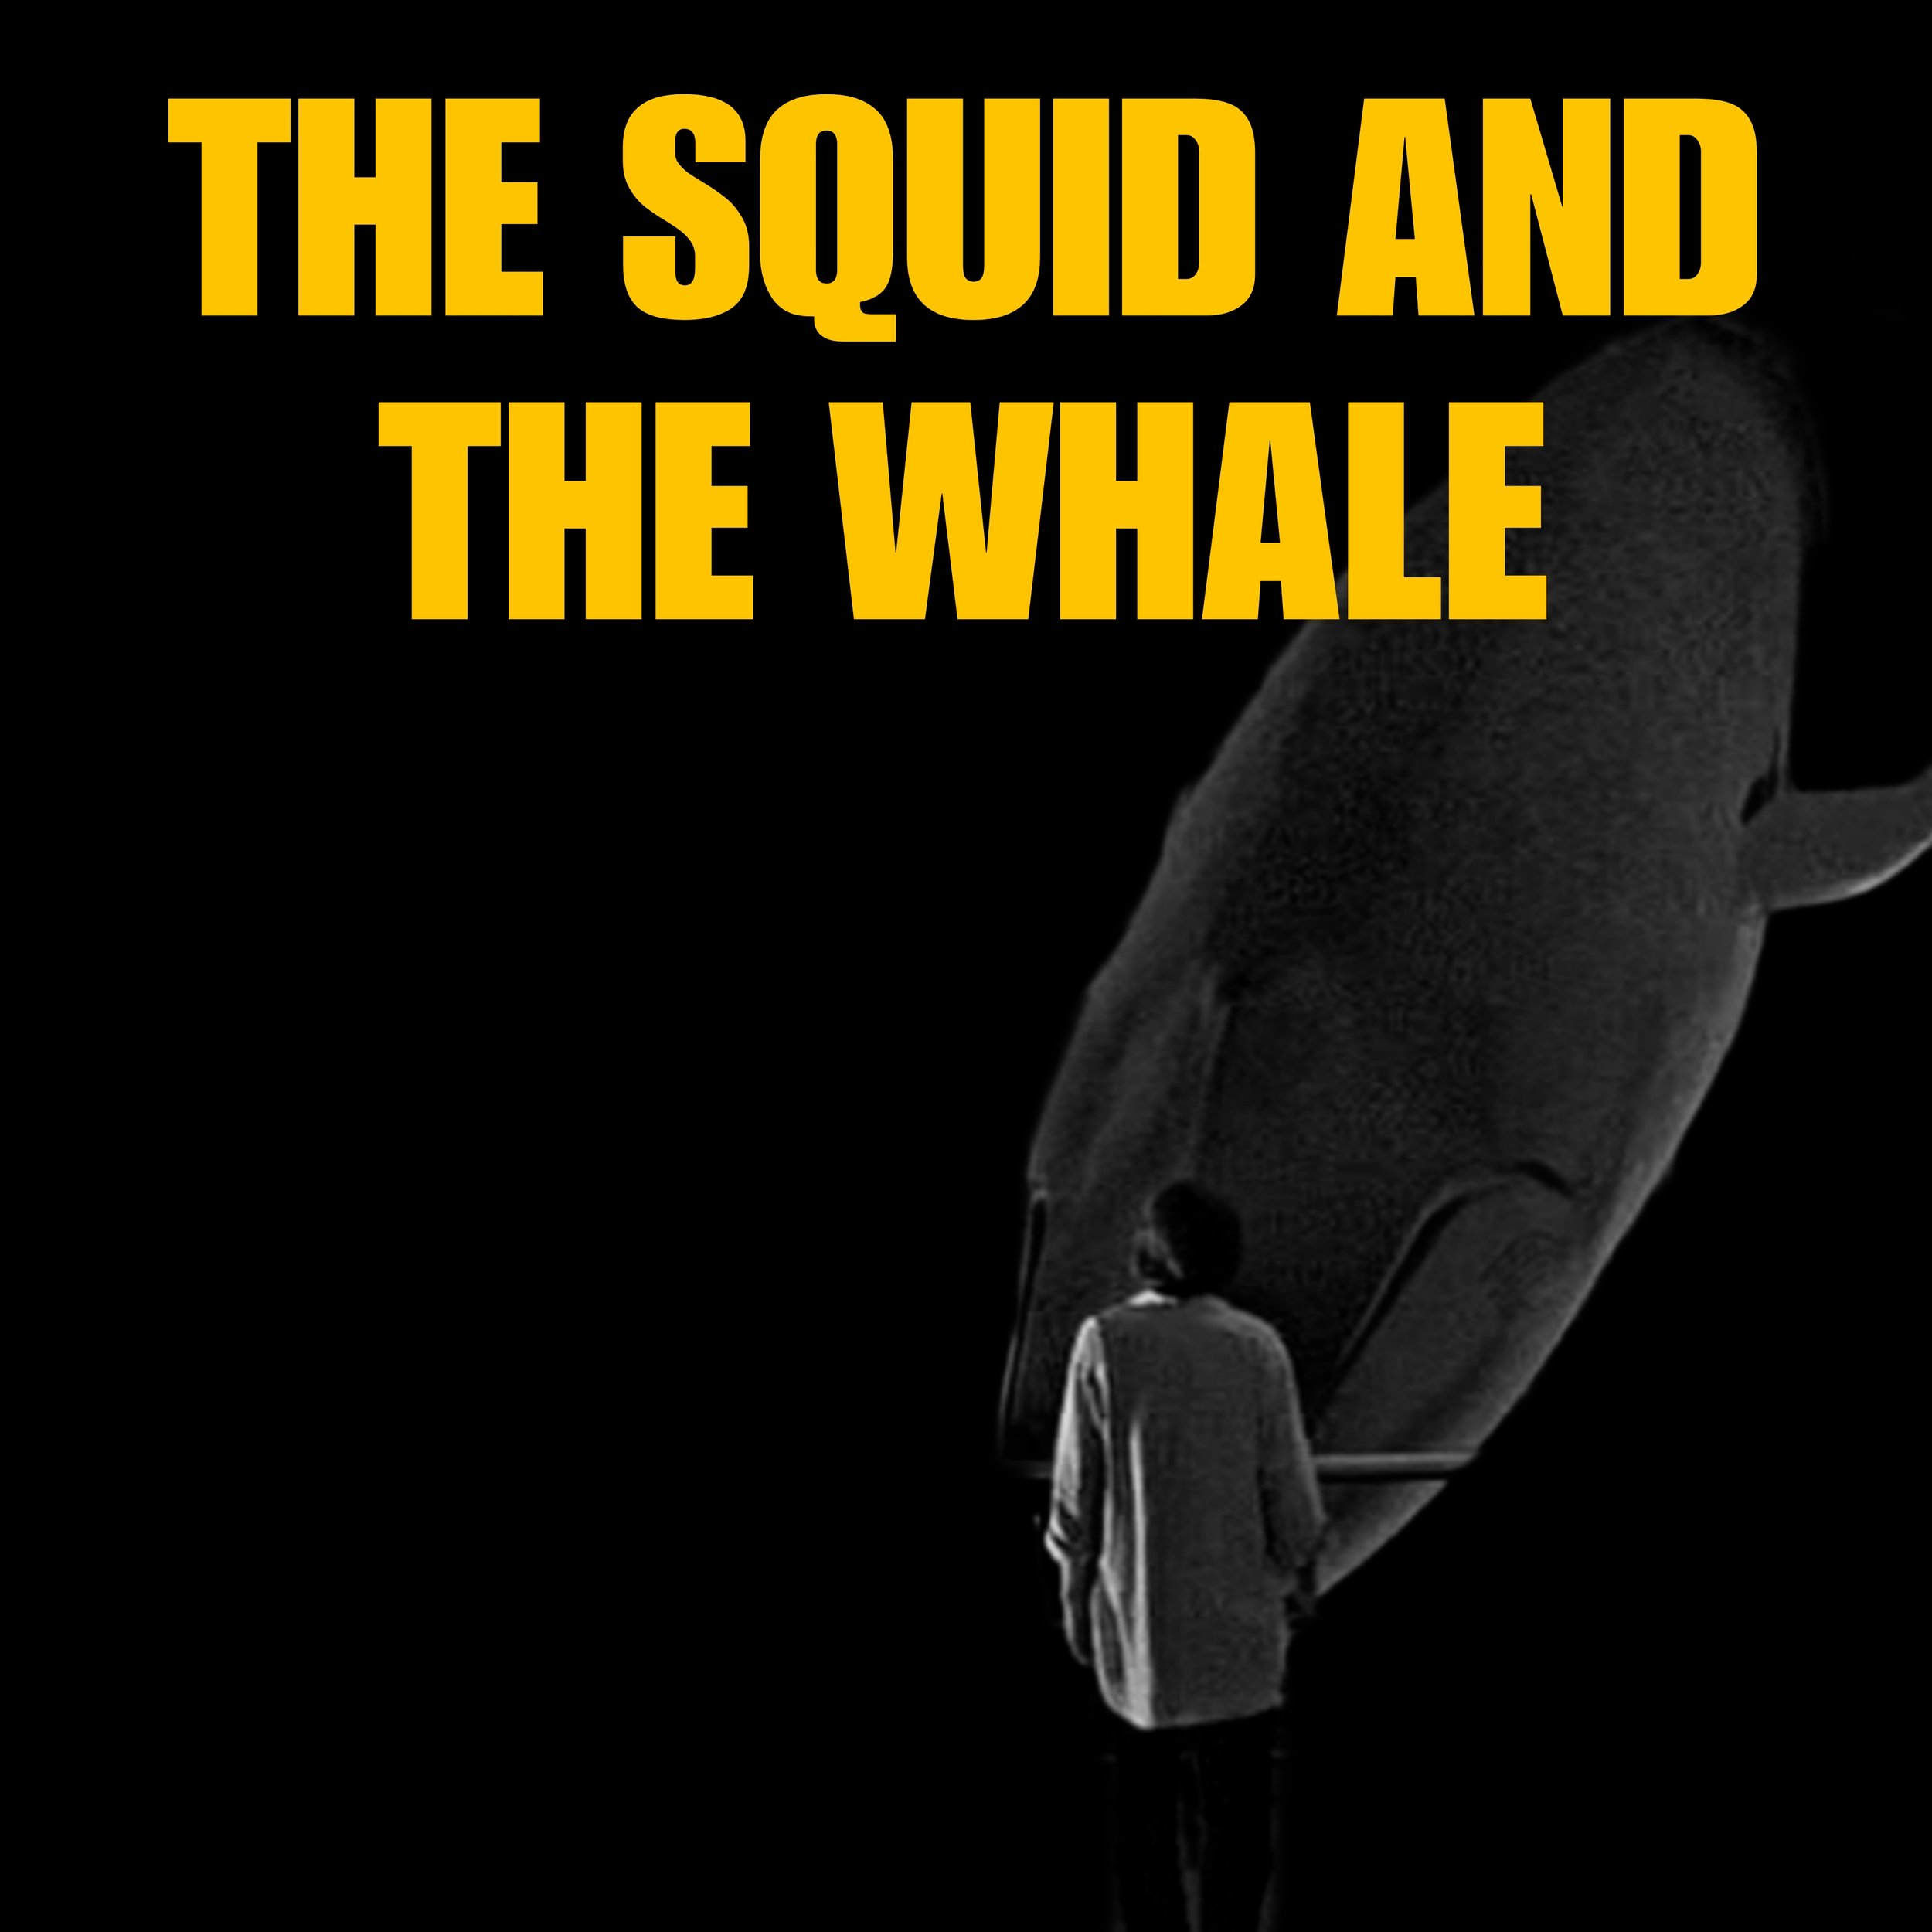 fbnf the squid and the whale.jpg